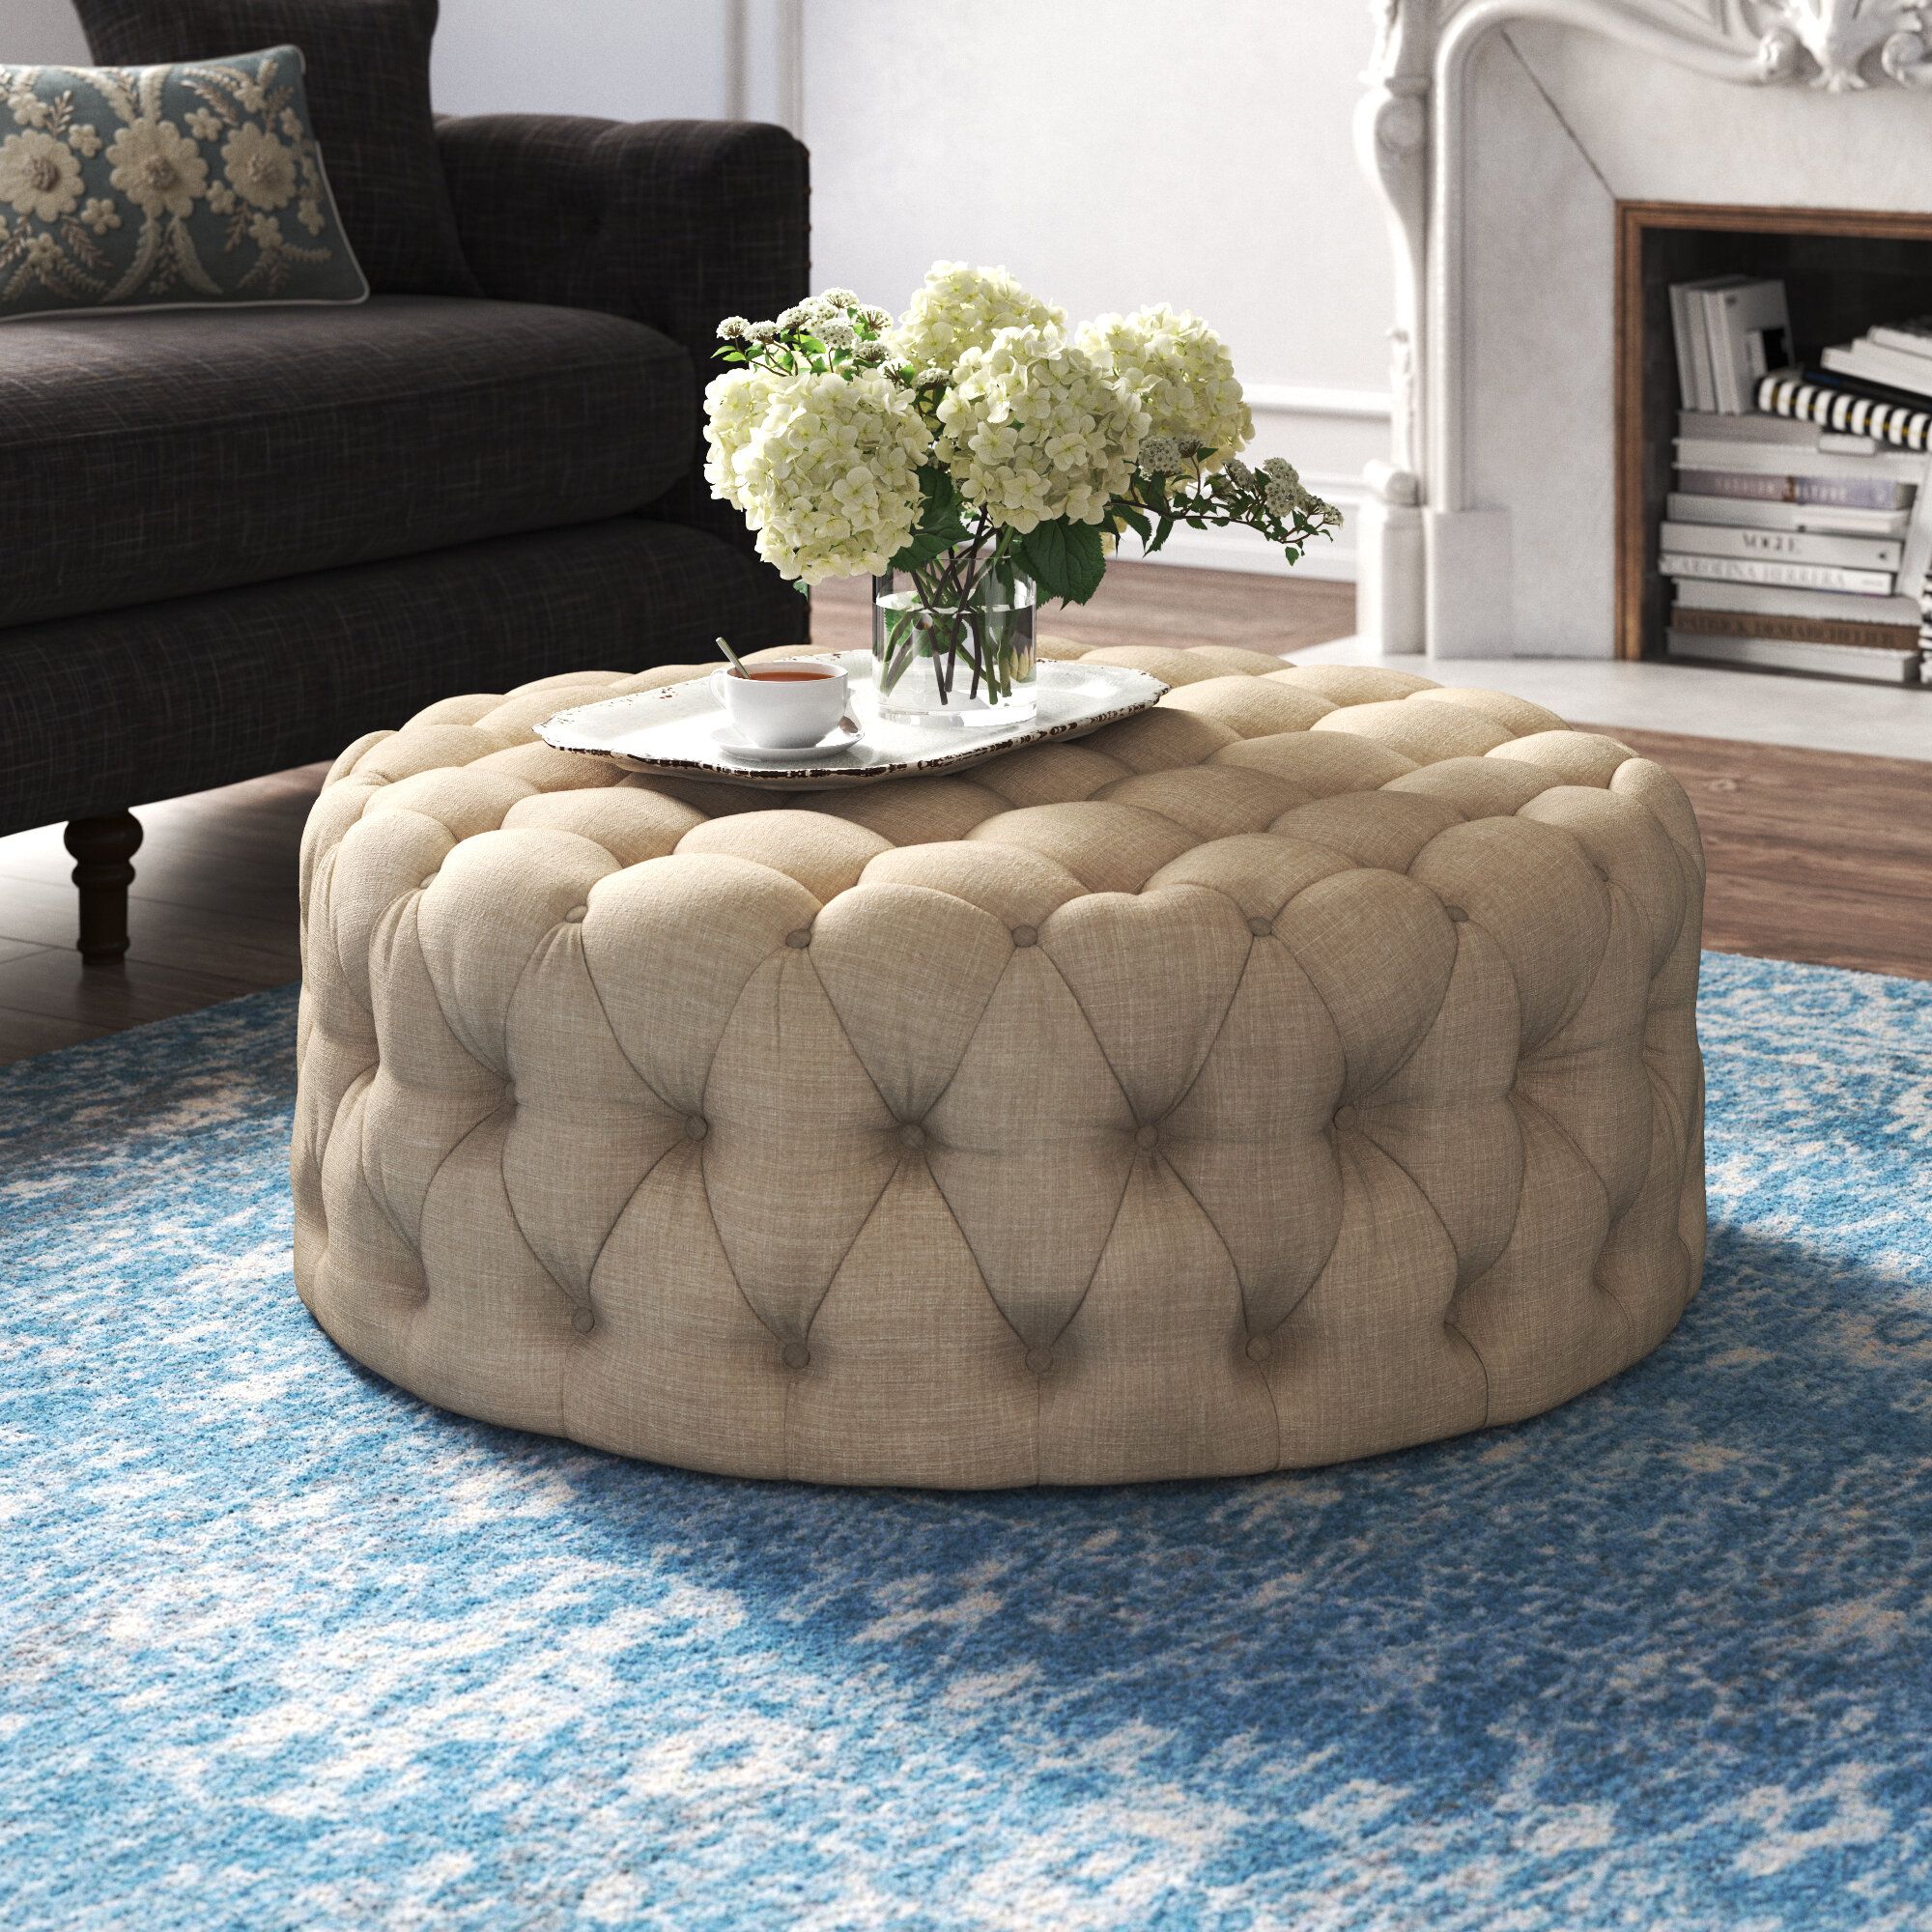 Kelly Clarkson Home Acklen Upholstered Ottoman & Reviews | Wayfair Intended For Upholstered Ottomans (View 9 of 15)